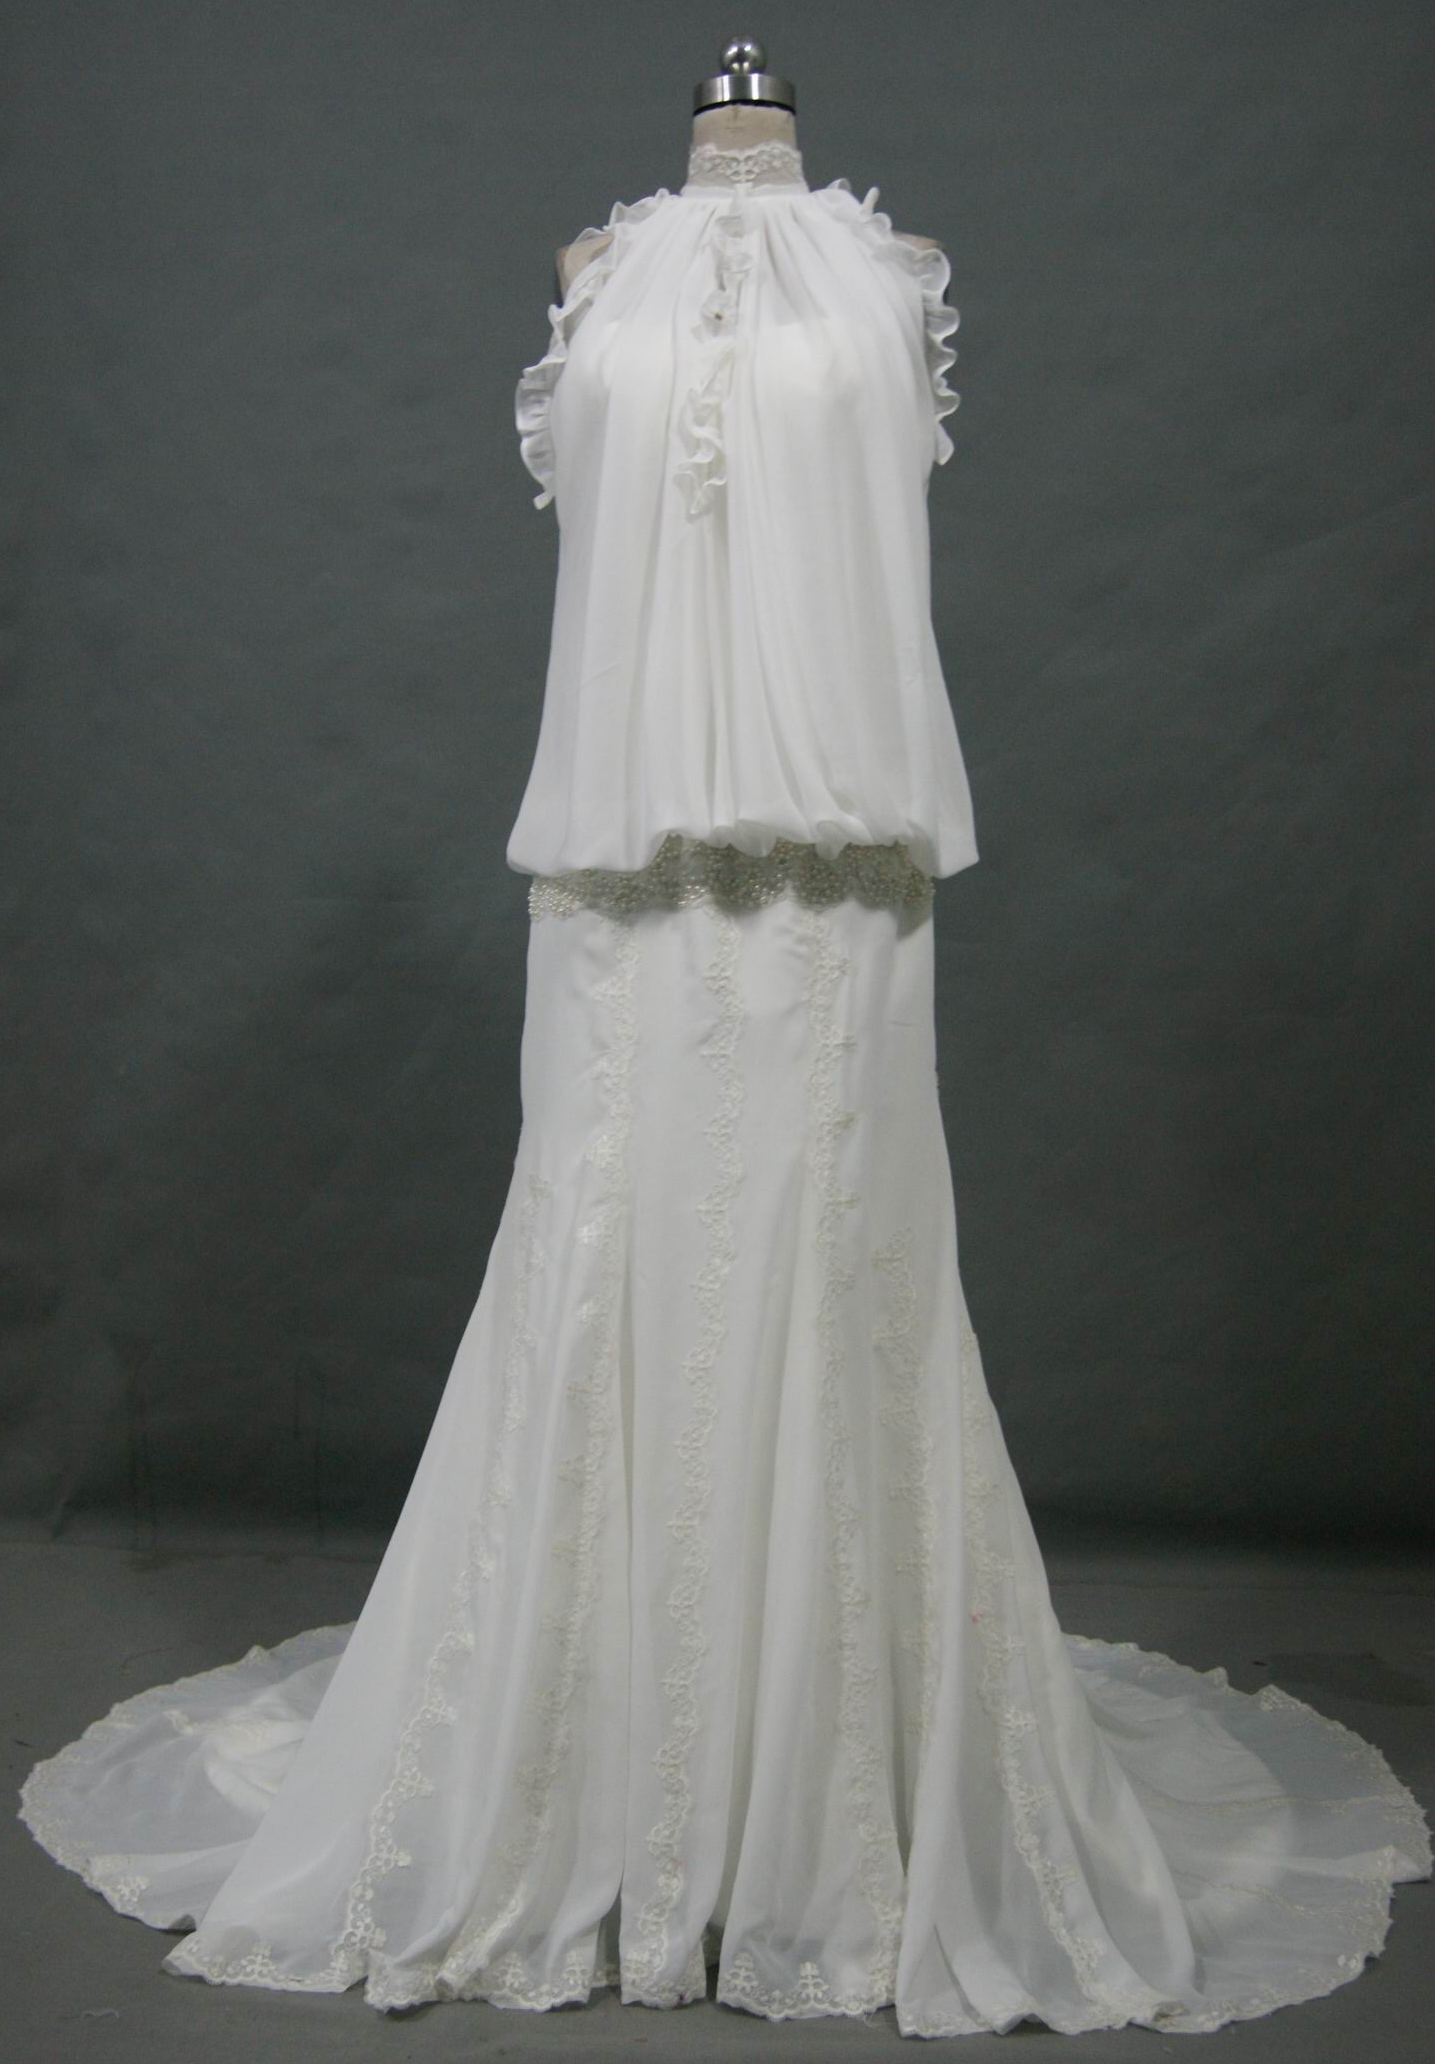 Chiffon and Lace bridal gown